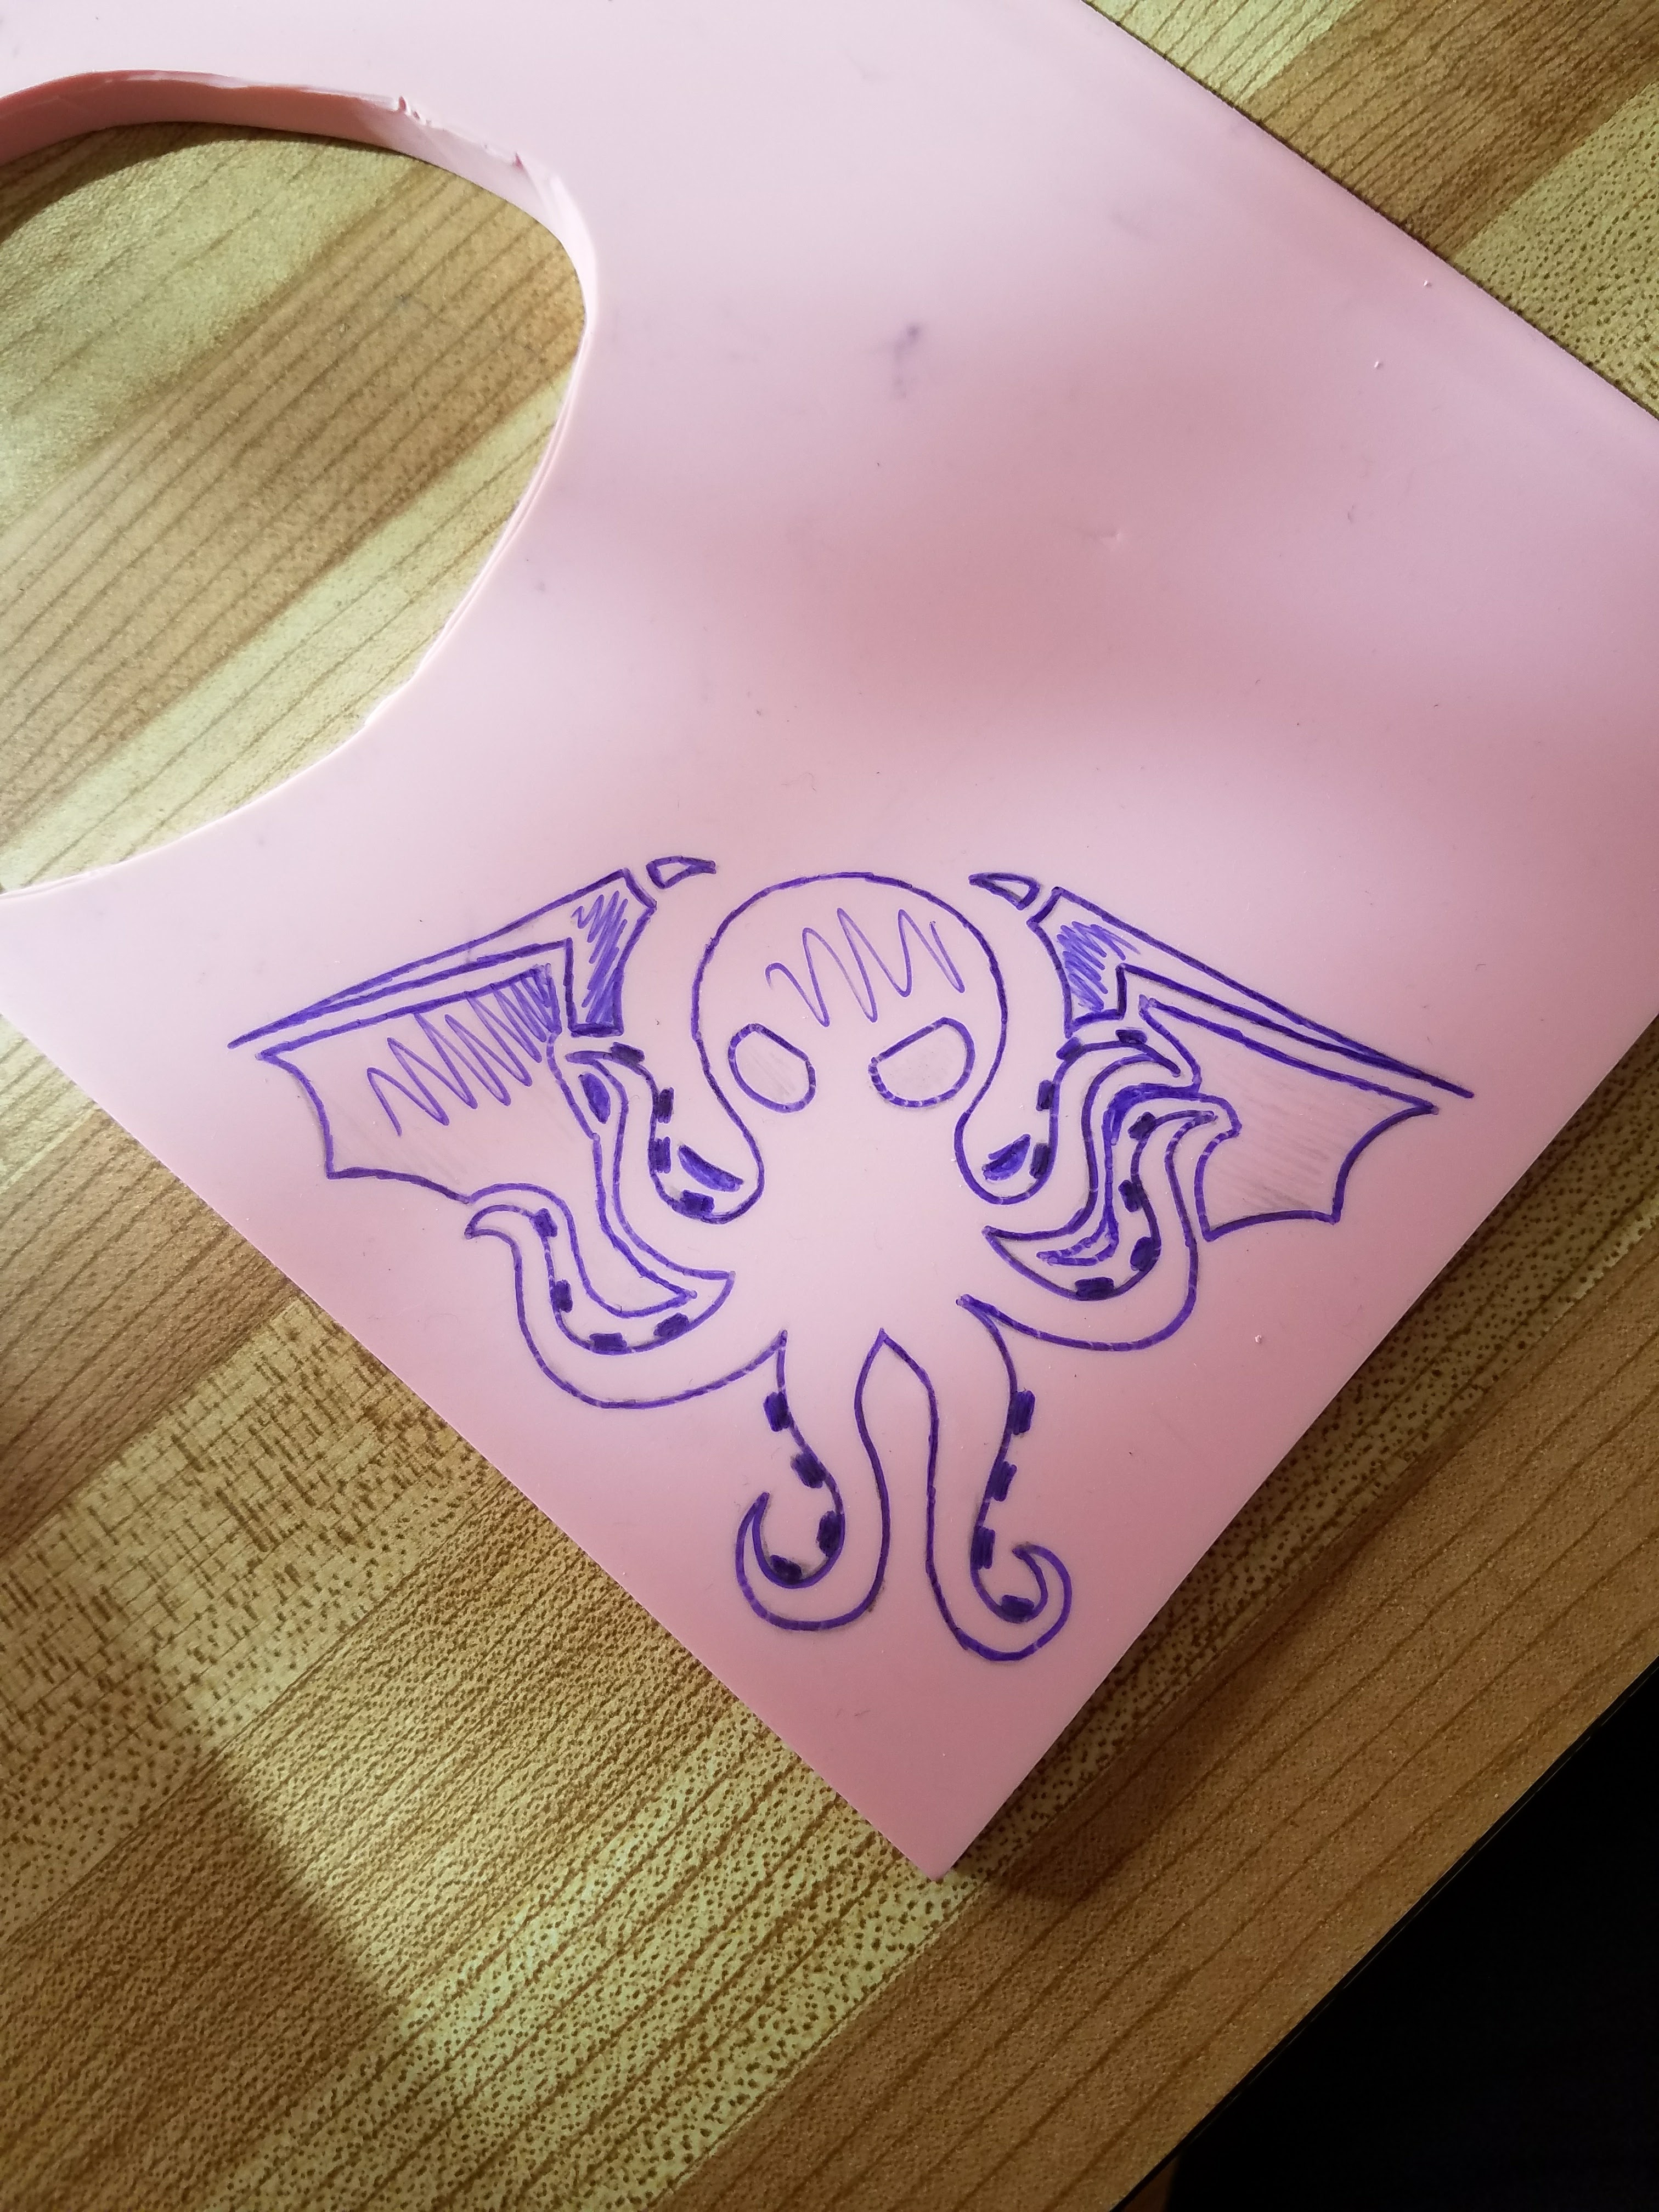 A block of pink rubber with a picture of Cthulhu's head and wings drawn on it in blue pen.